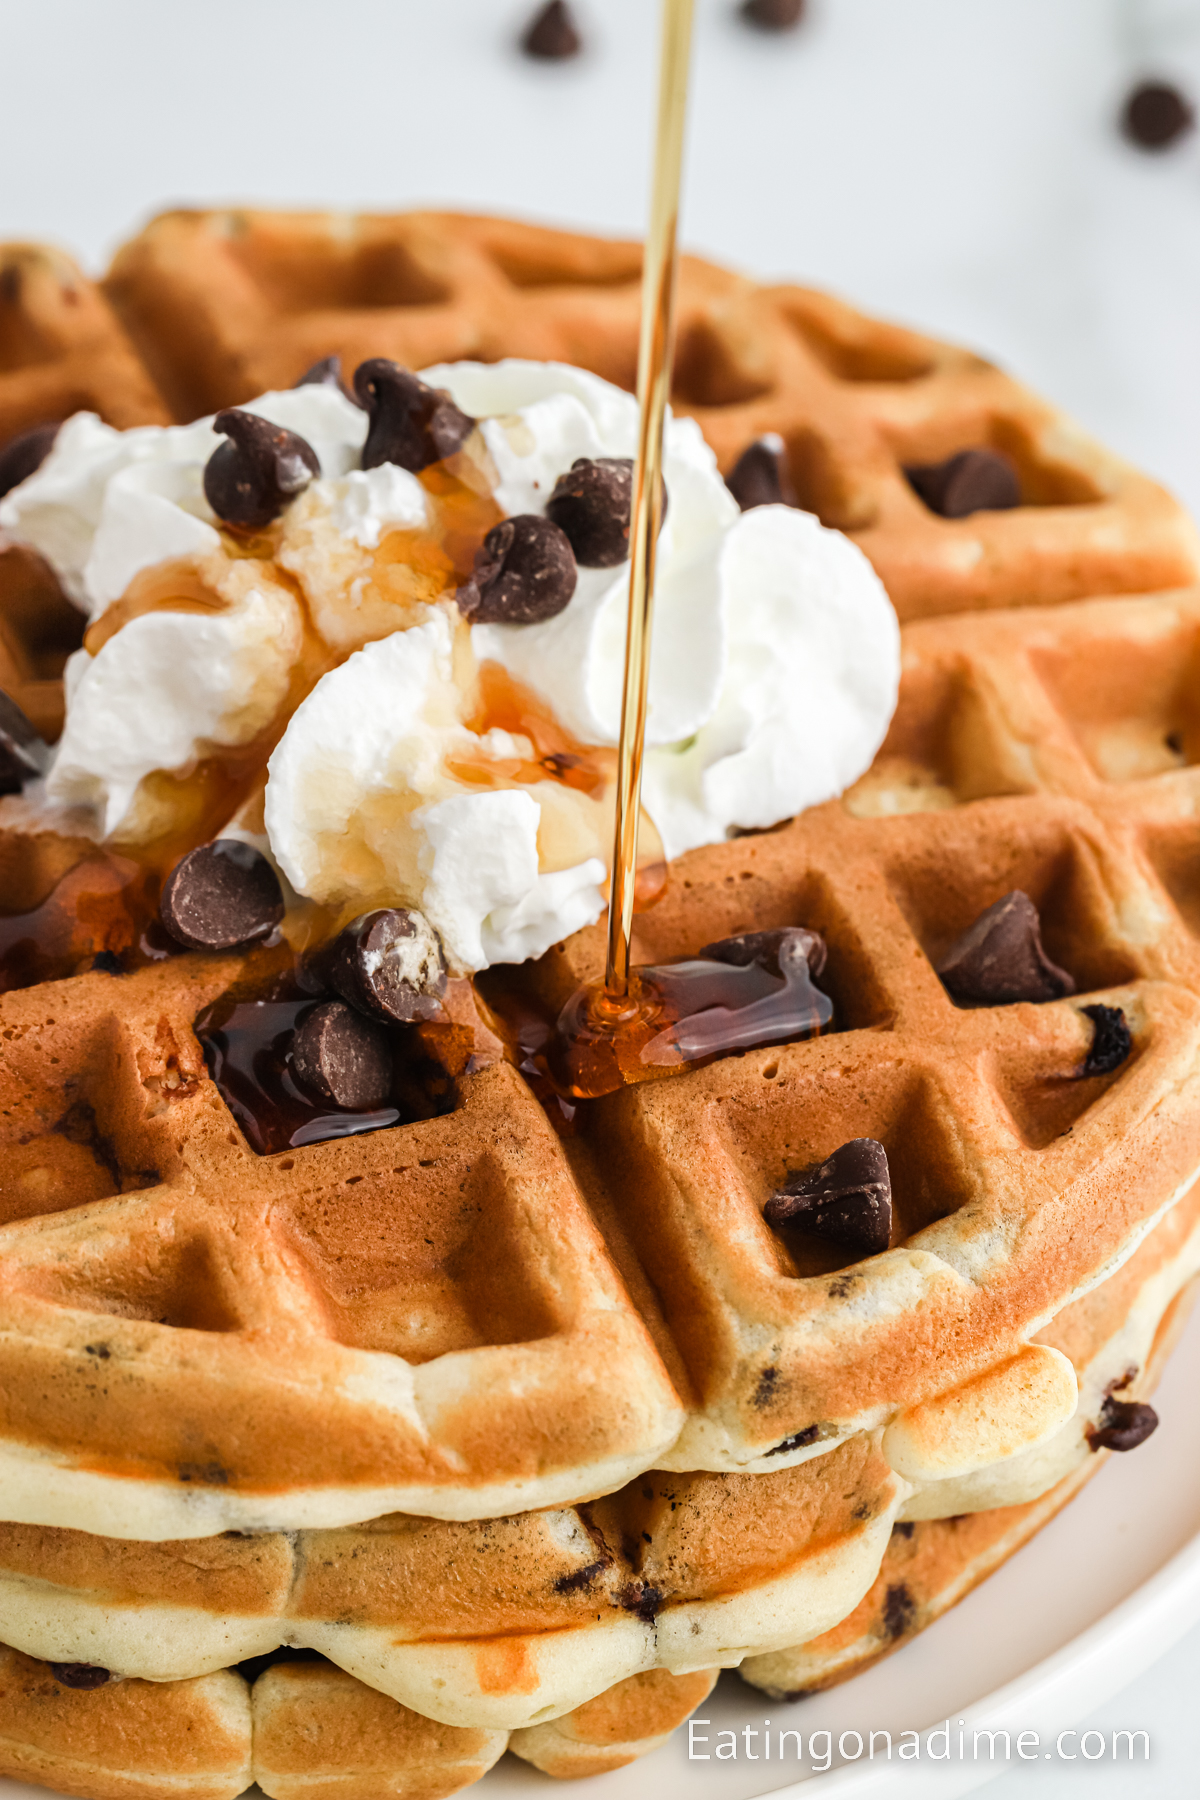 Chocolate Chip Waffles topped with chocolate chips, whipped cream and syrup